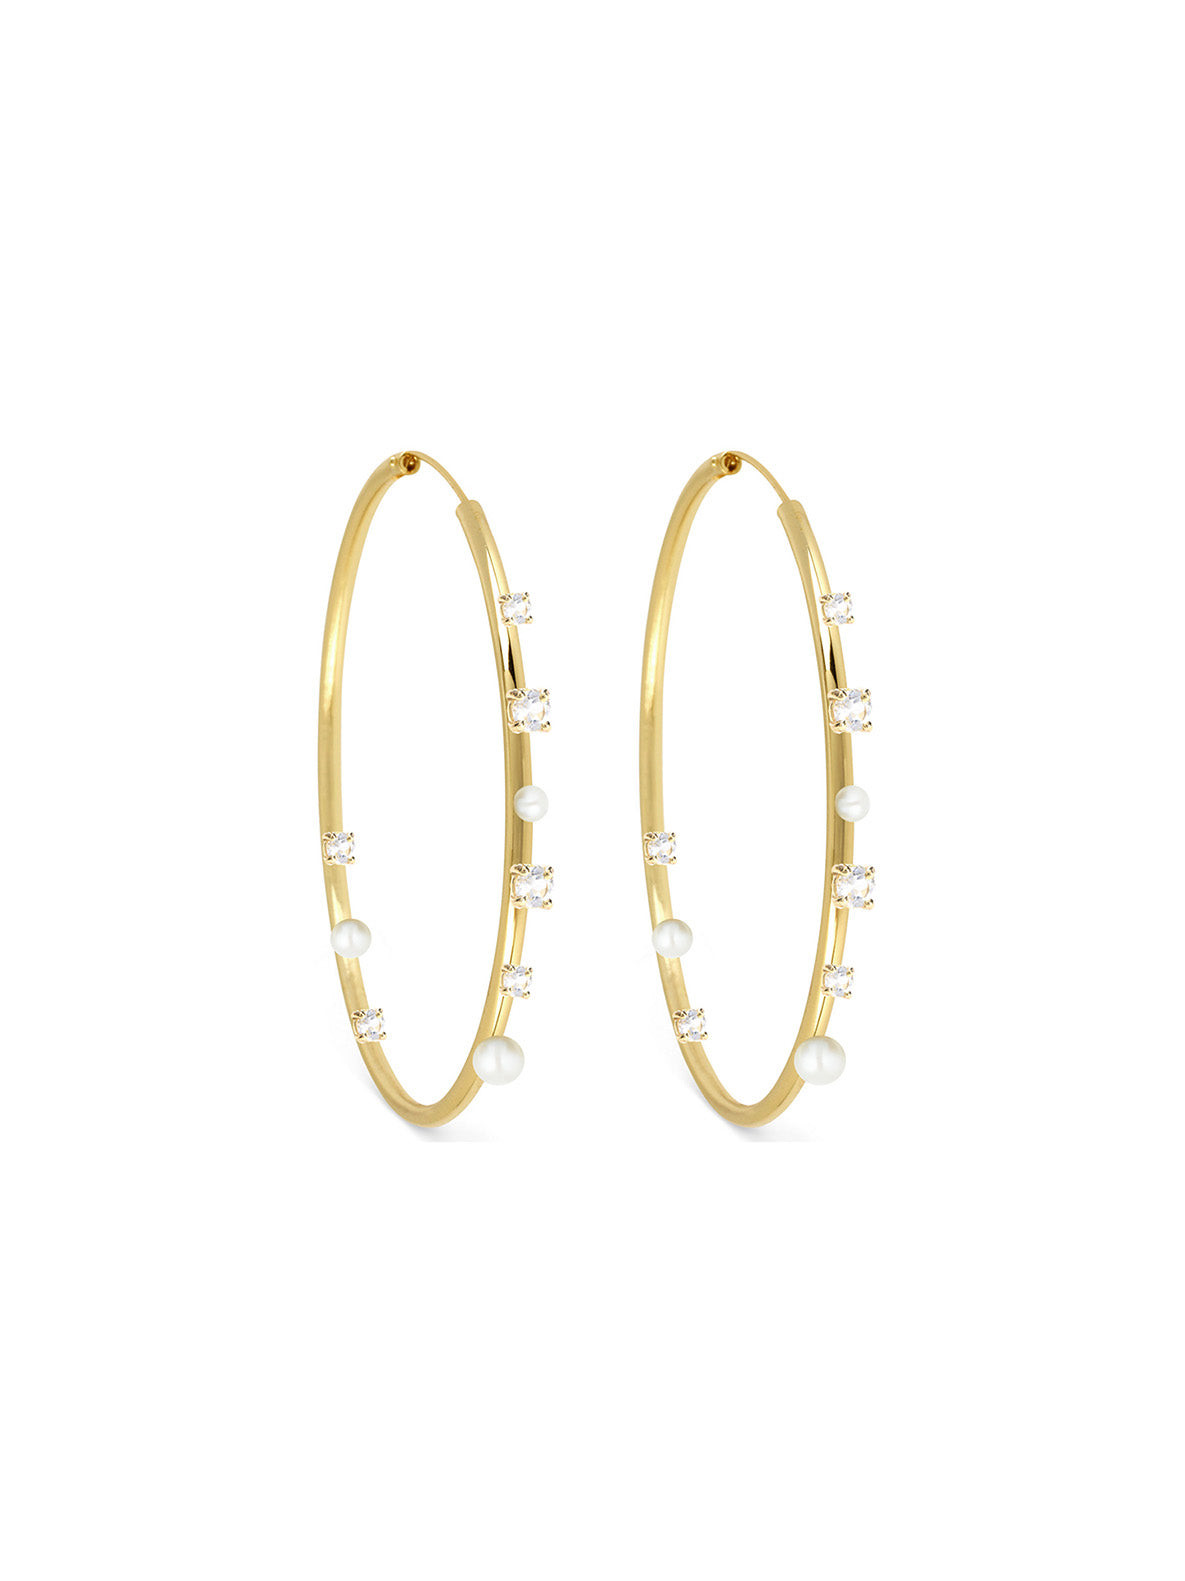 Diamond & Gemstone Hoops - Archival Collection